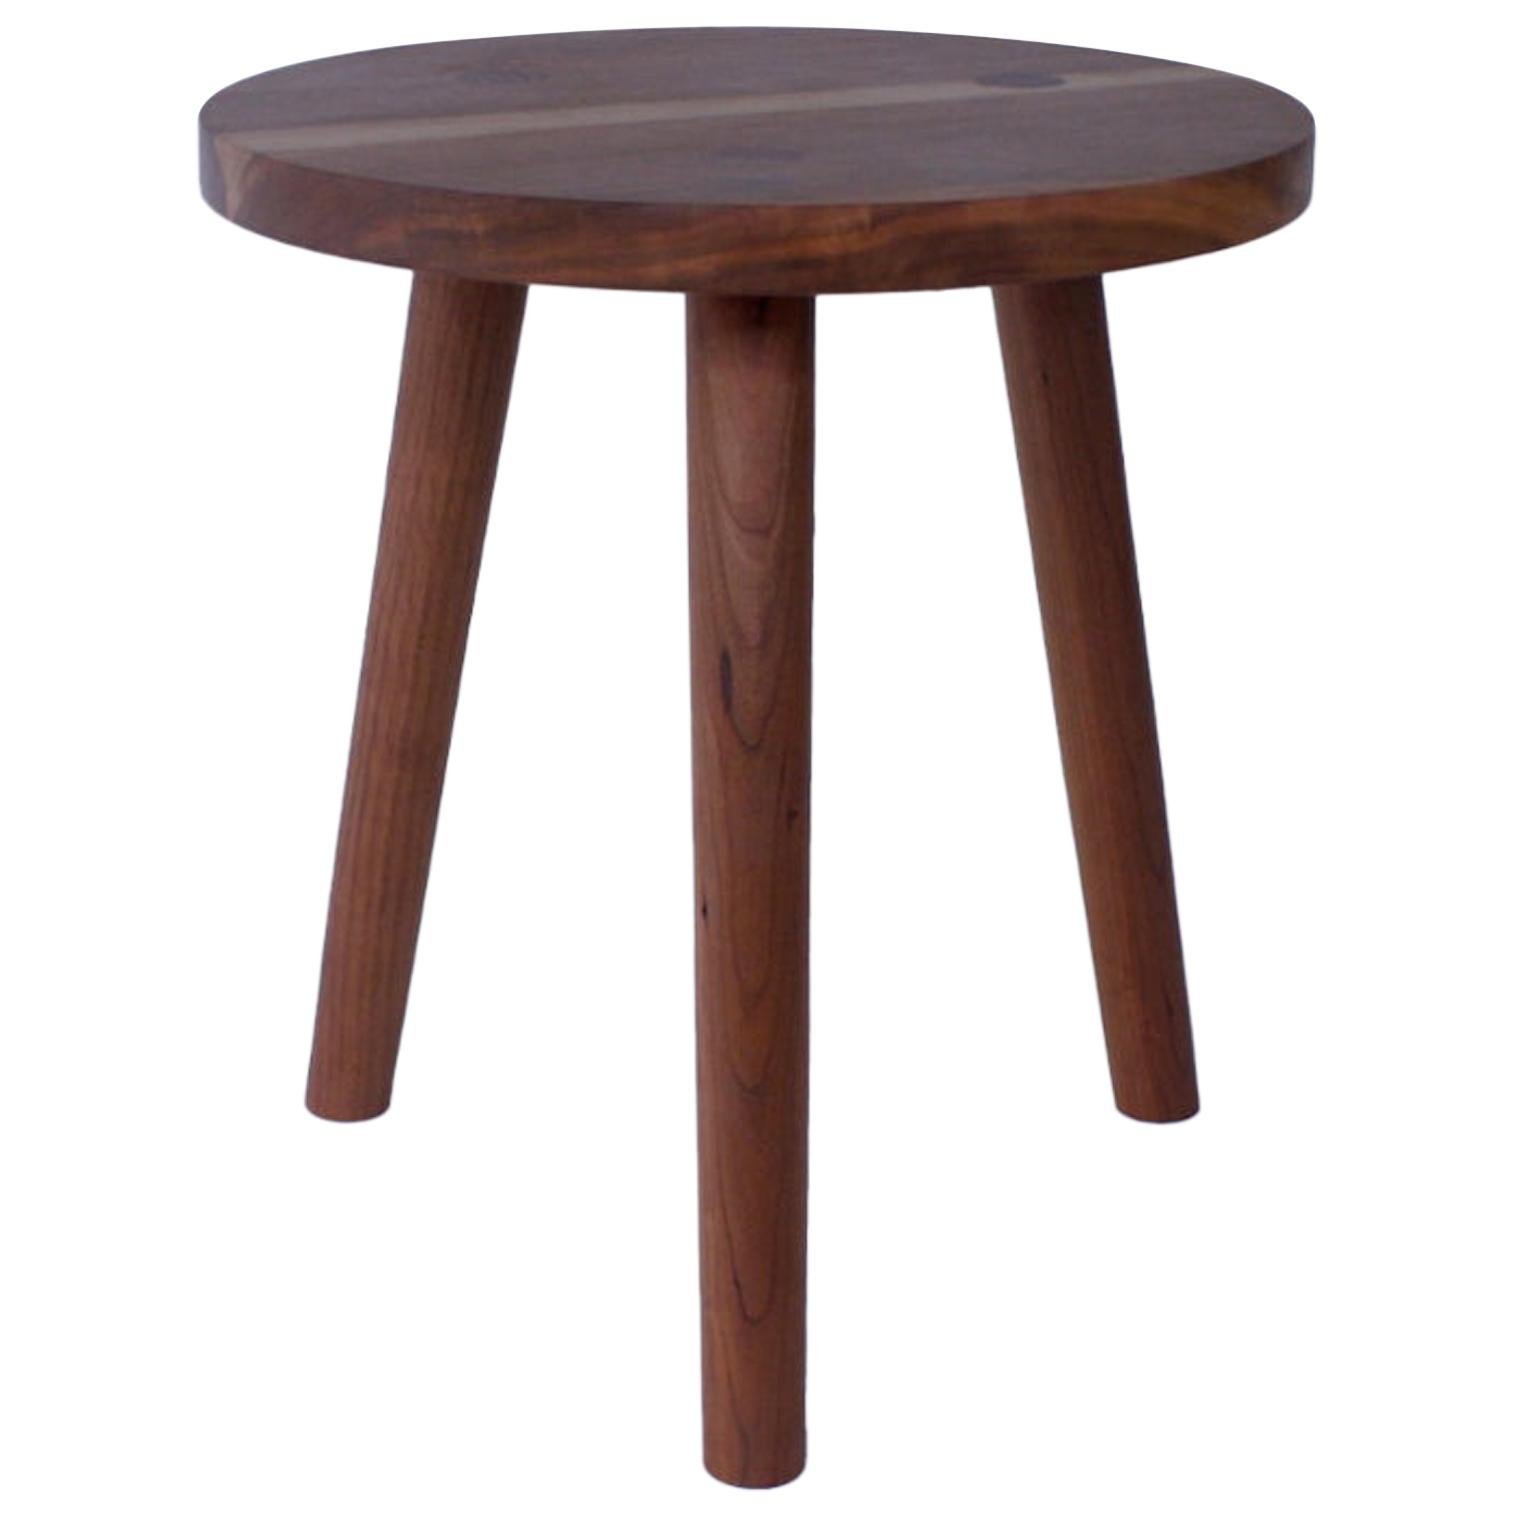 Bare a Handmade Wood Stool or Side Table Available in Custom Sizing and Finishes For Sale